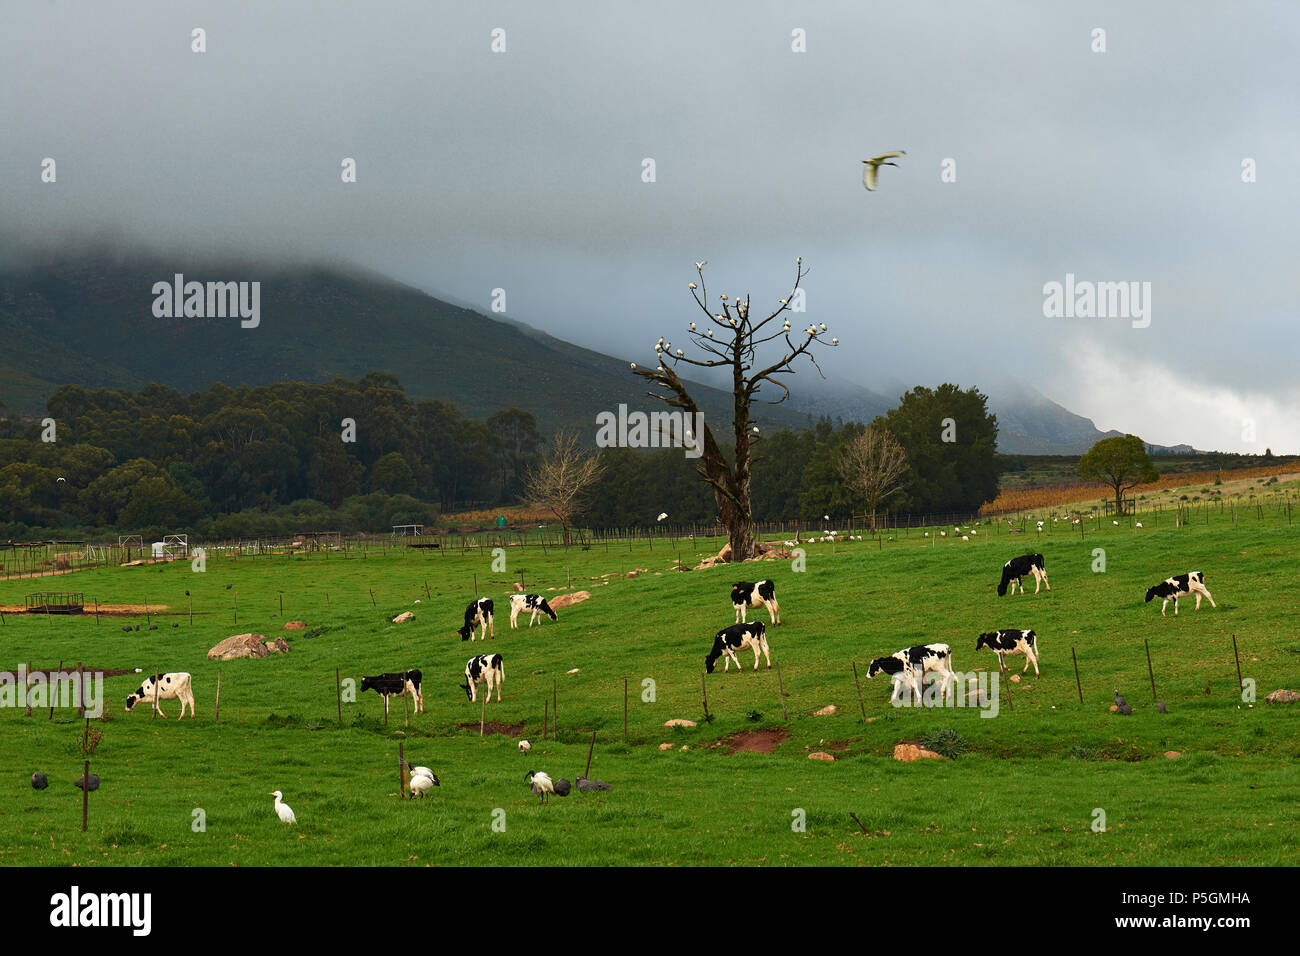 Cattle Egret and African Sacred Ibis in field of cows Stock Photo